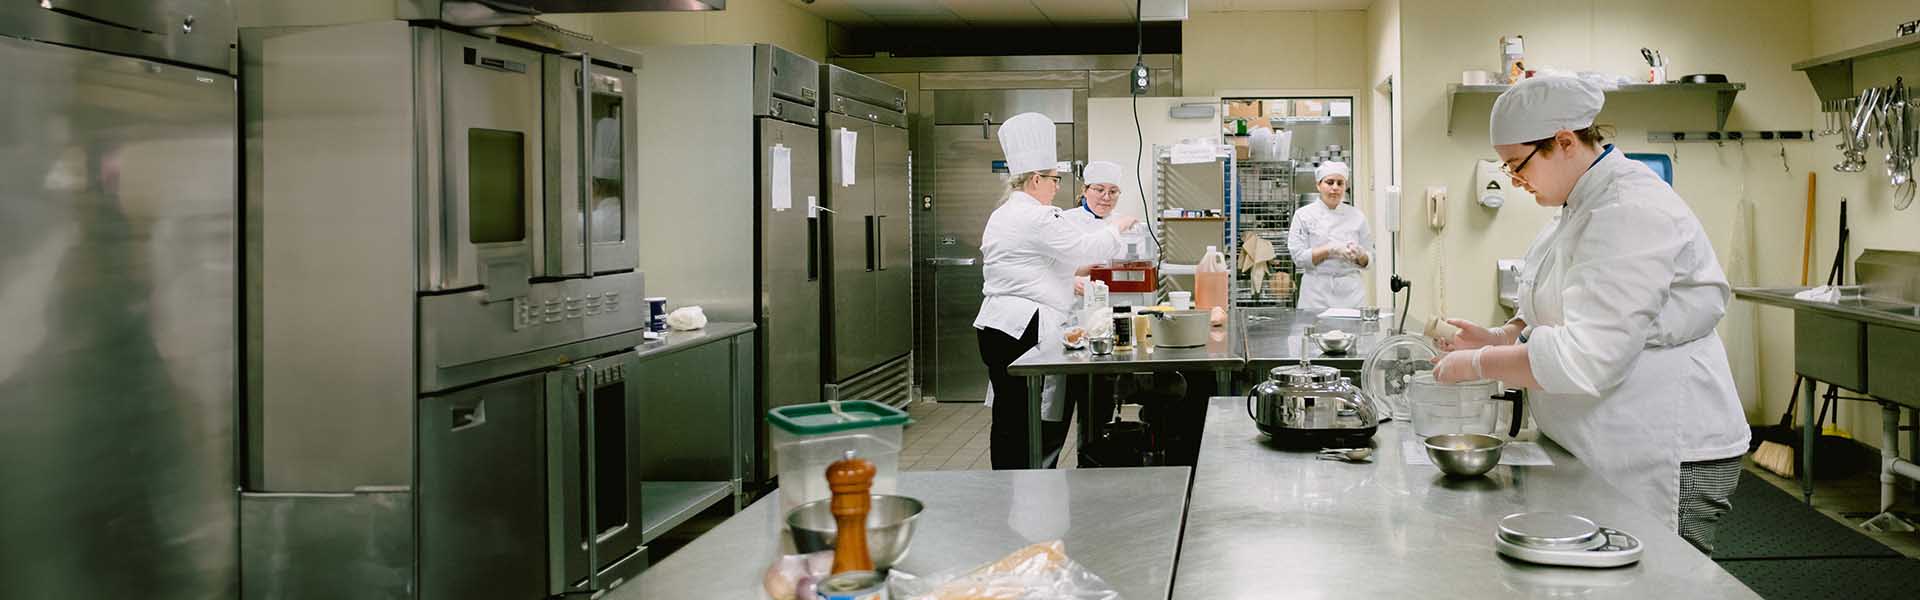 A group of culinary arts students working in the kitchen lab